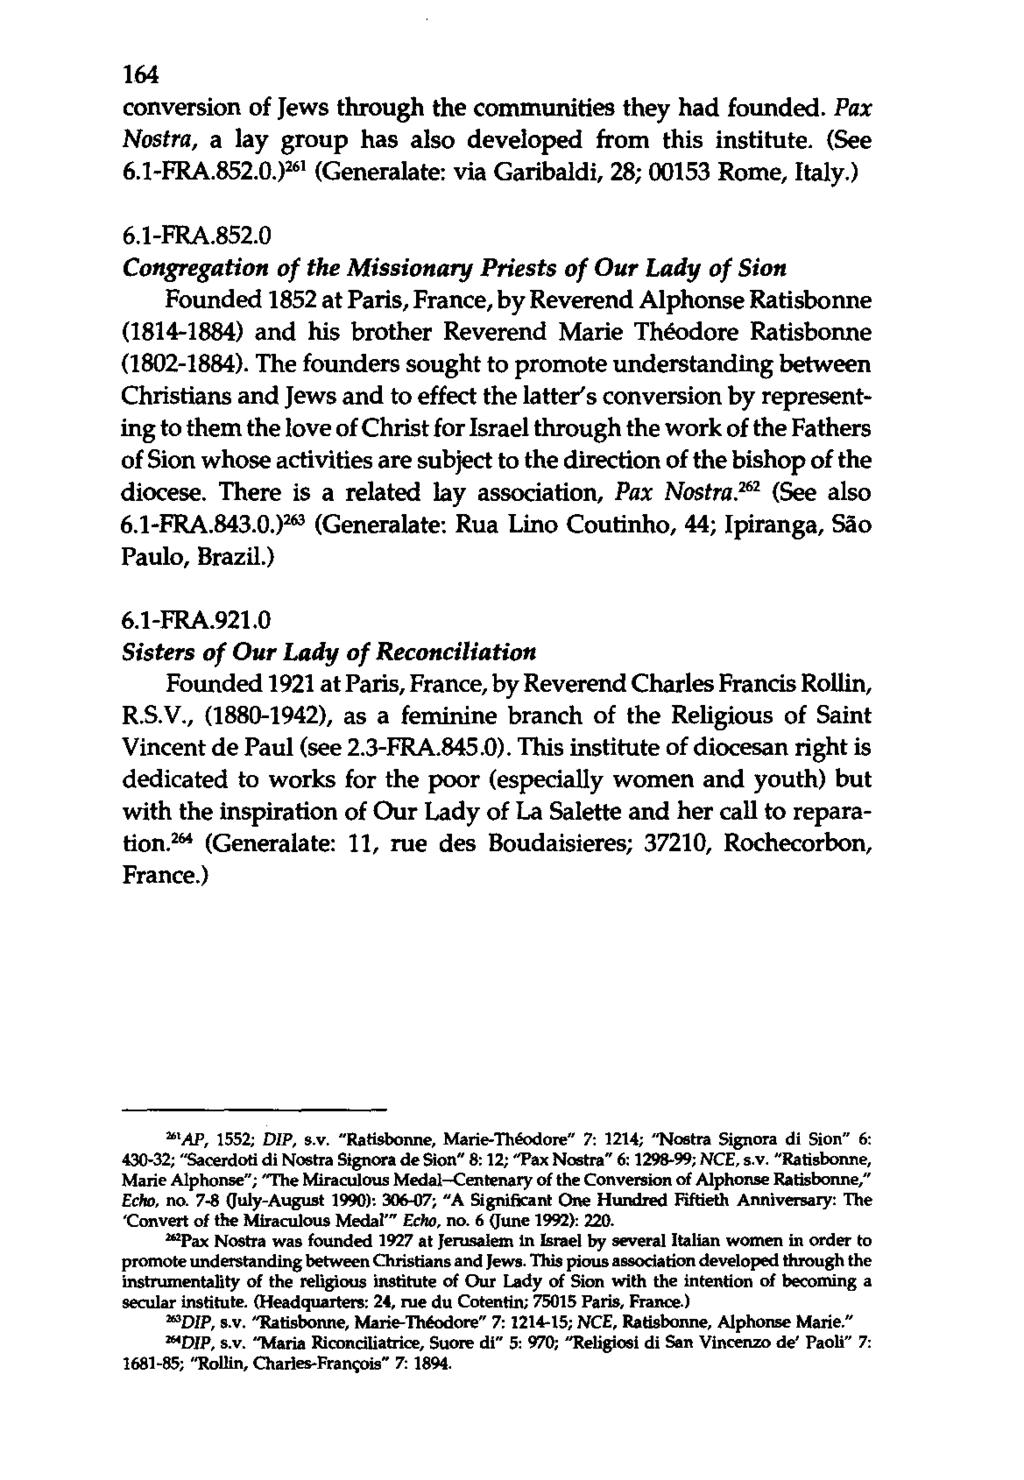 164 conversion of Jews through the communities they had founded. Pax Nostra, a lay group has also developed from this institute. (See 6.1-FRA.852.0.